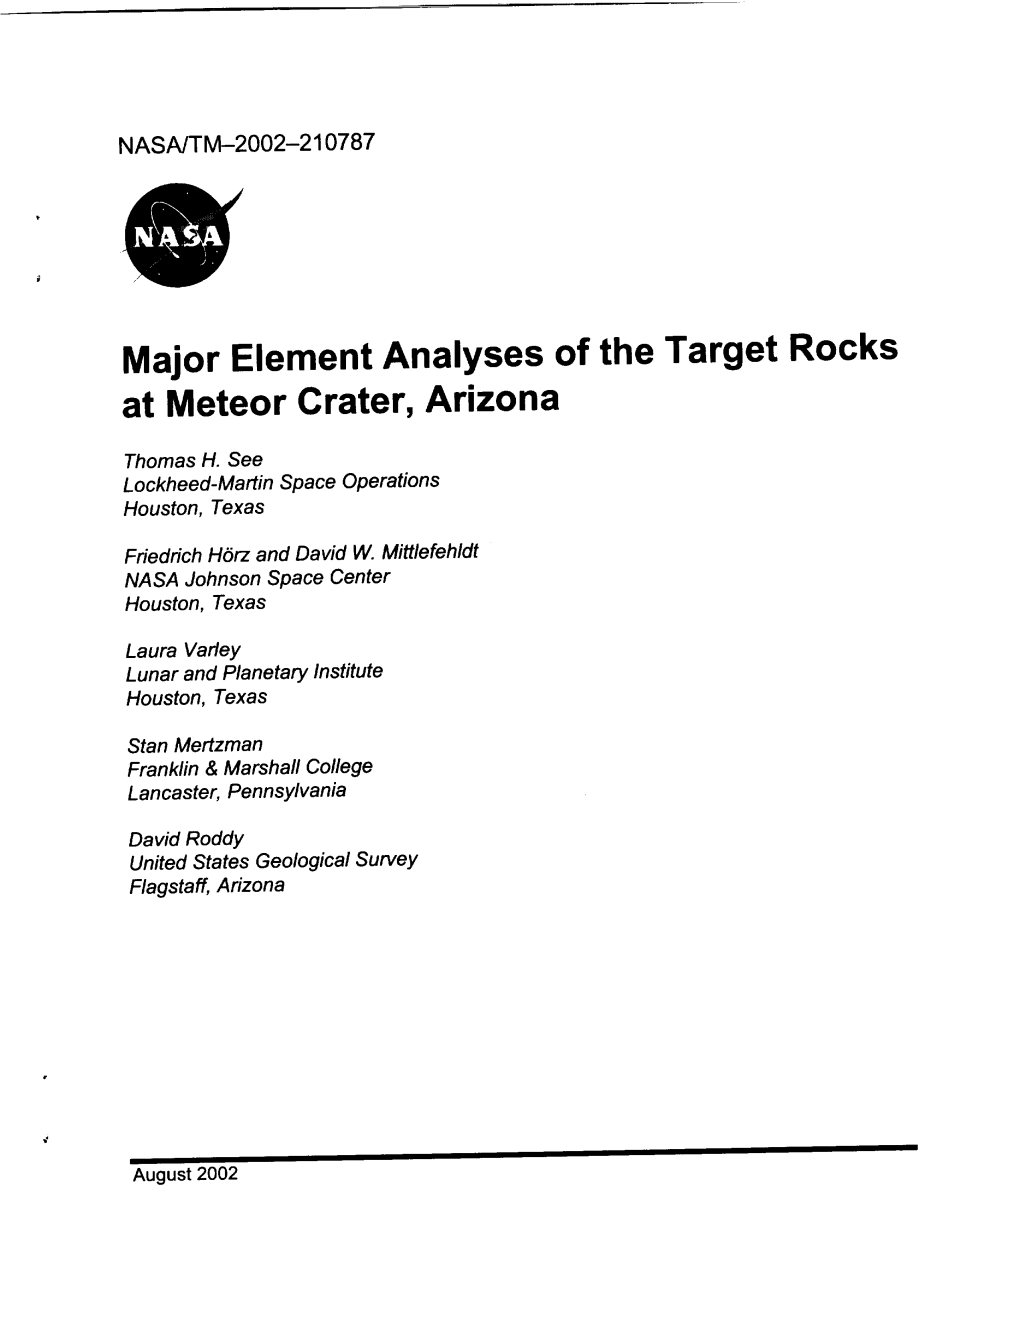 Major Element Analyses of the Target Rocks at Meteor Crater, Arizona